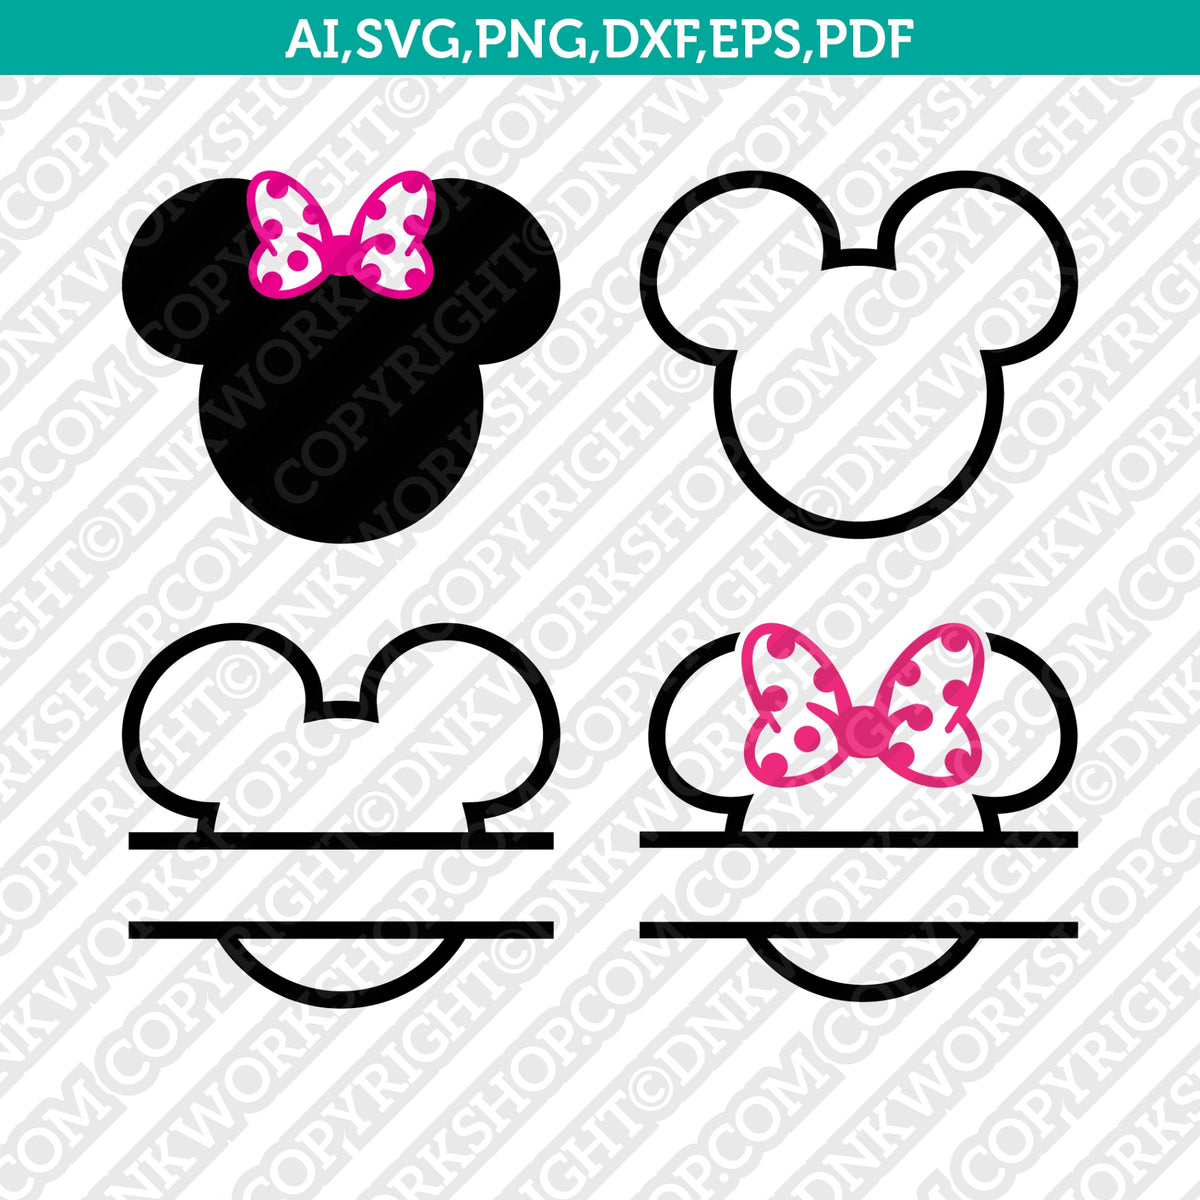 mickey mouse head with pants clip art